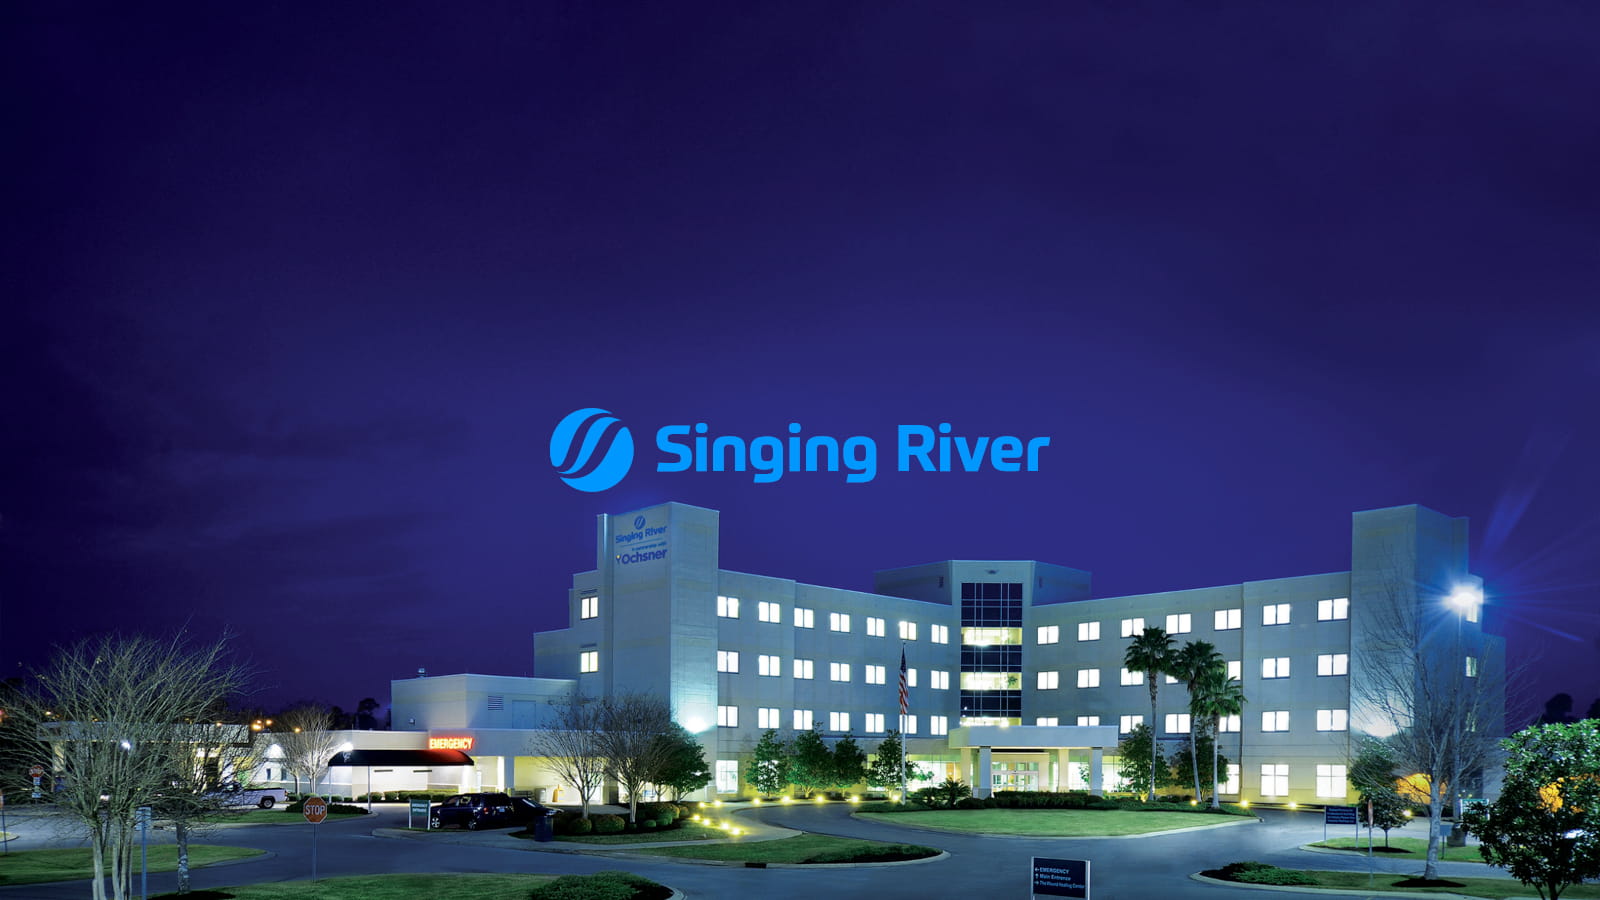 Singing River Health System: Data of 895,000 stolen in ransomware attack